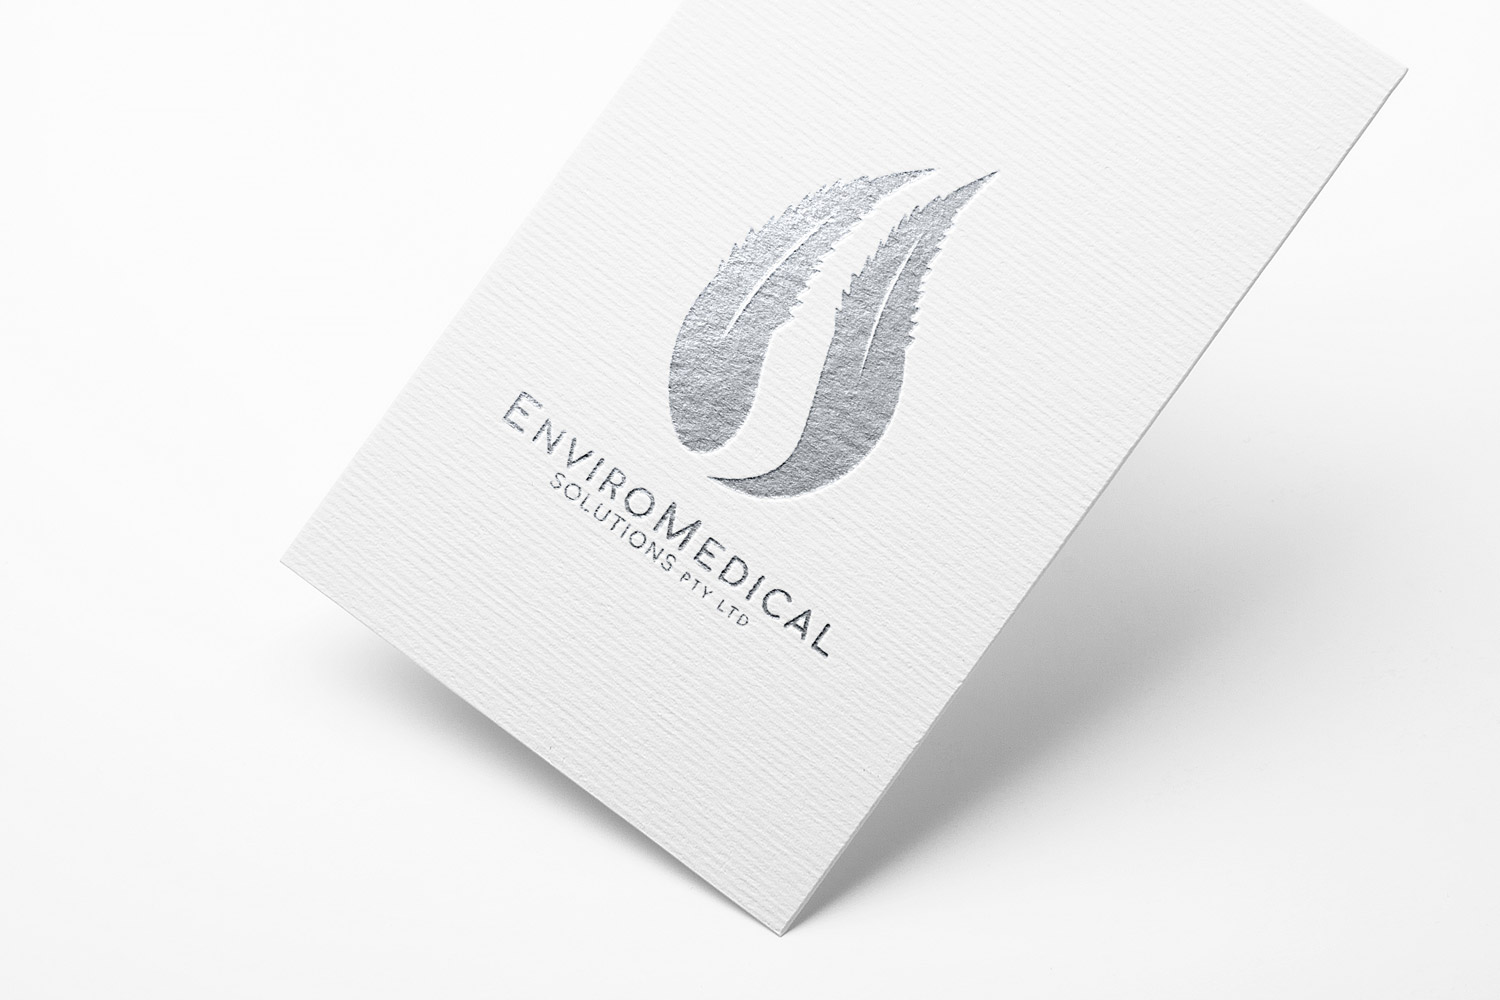 Silver EnviroMedical Solutions logo printed on a business card